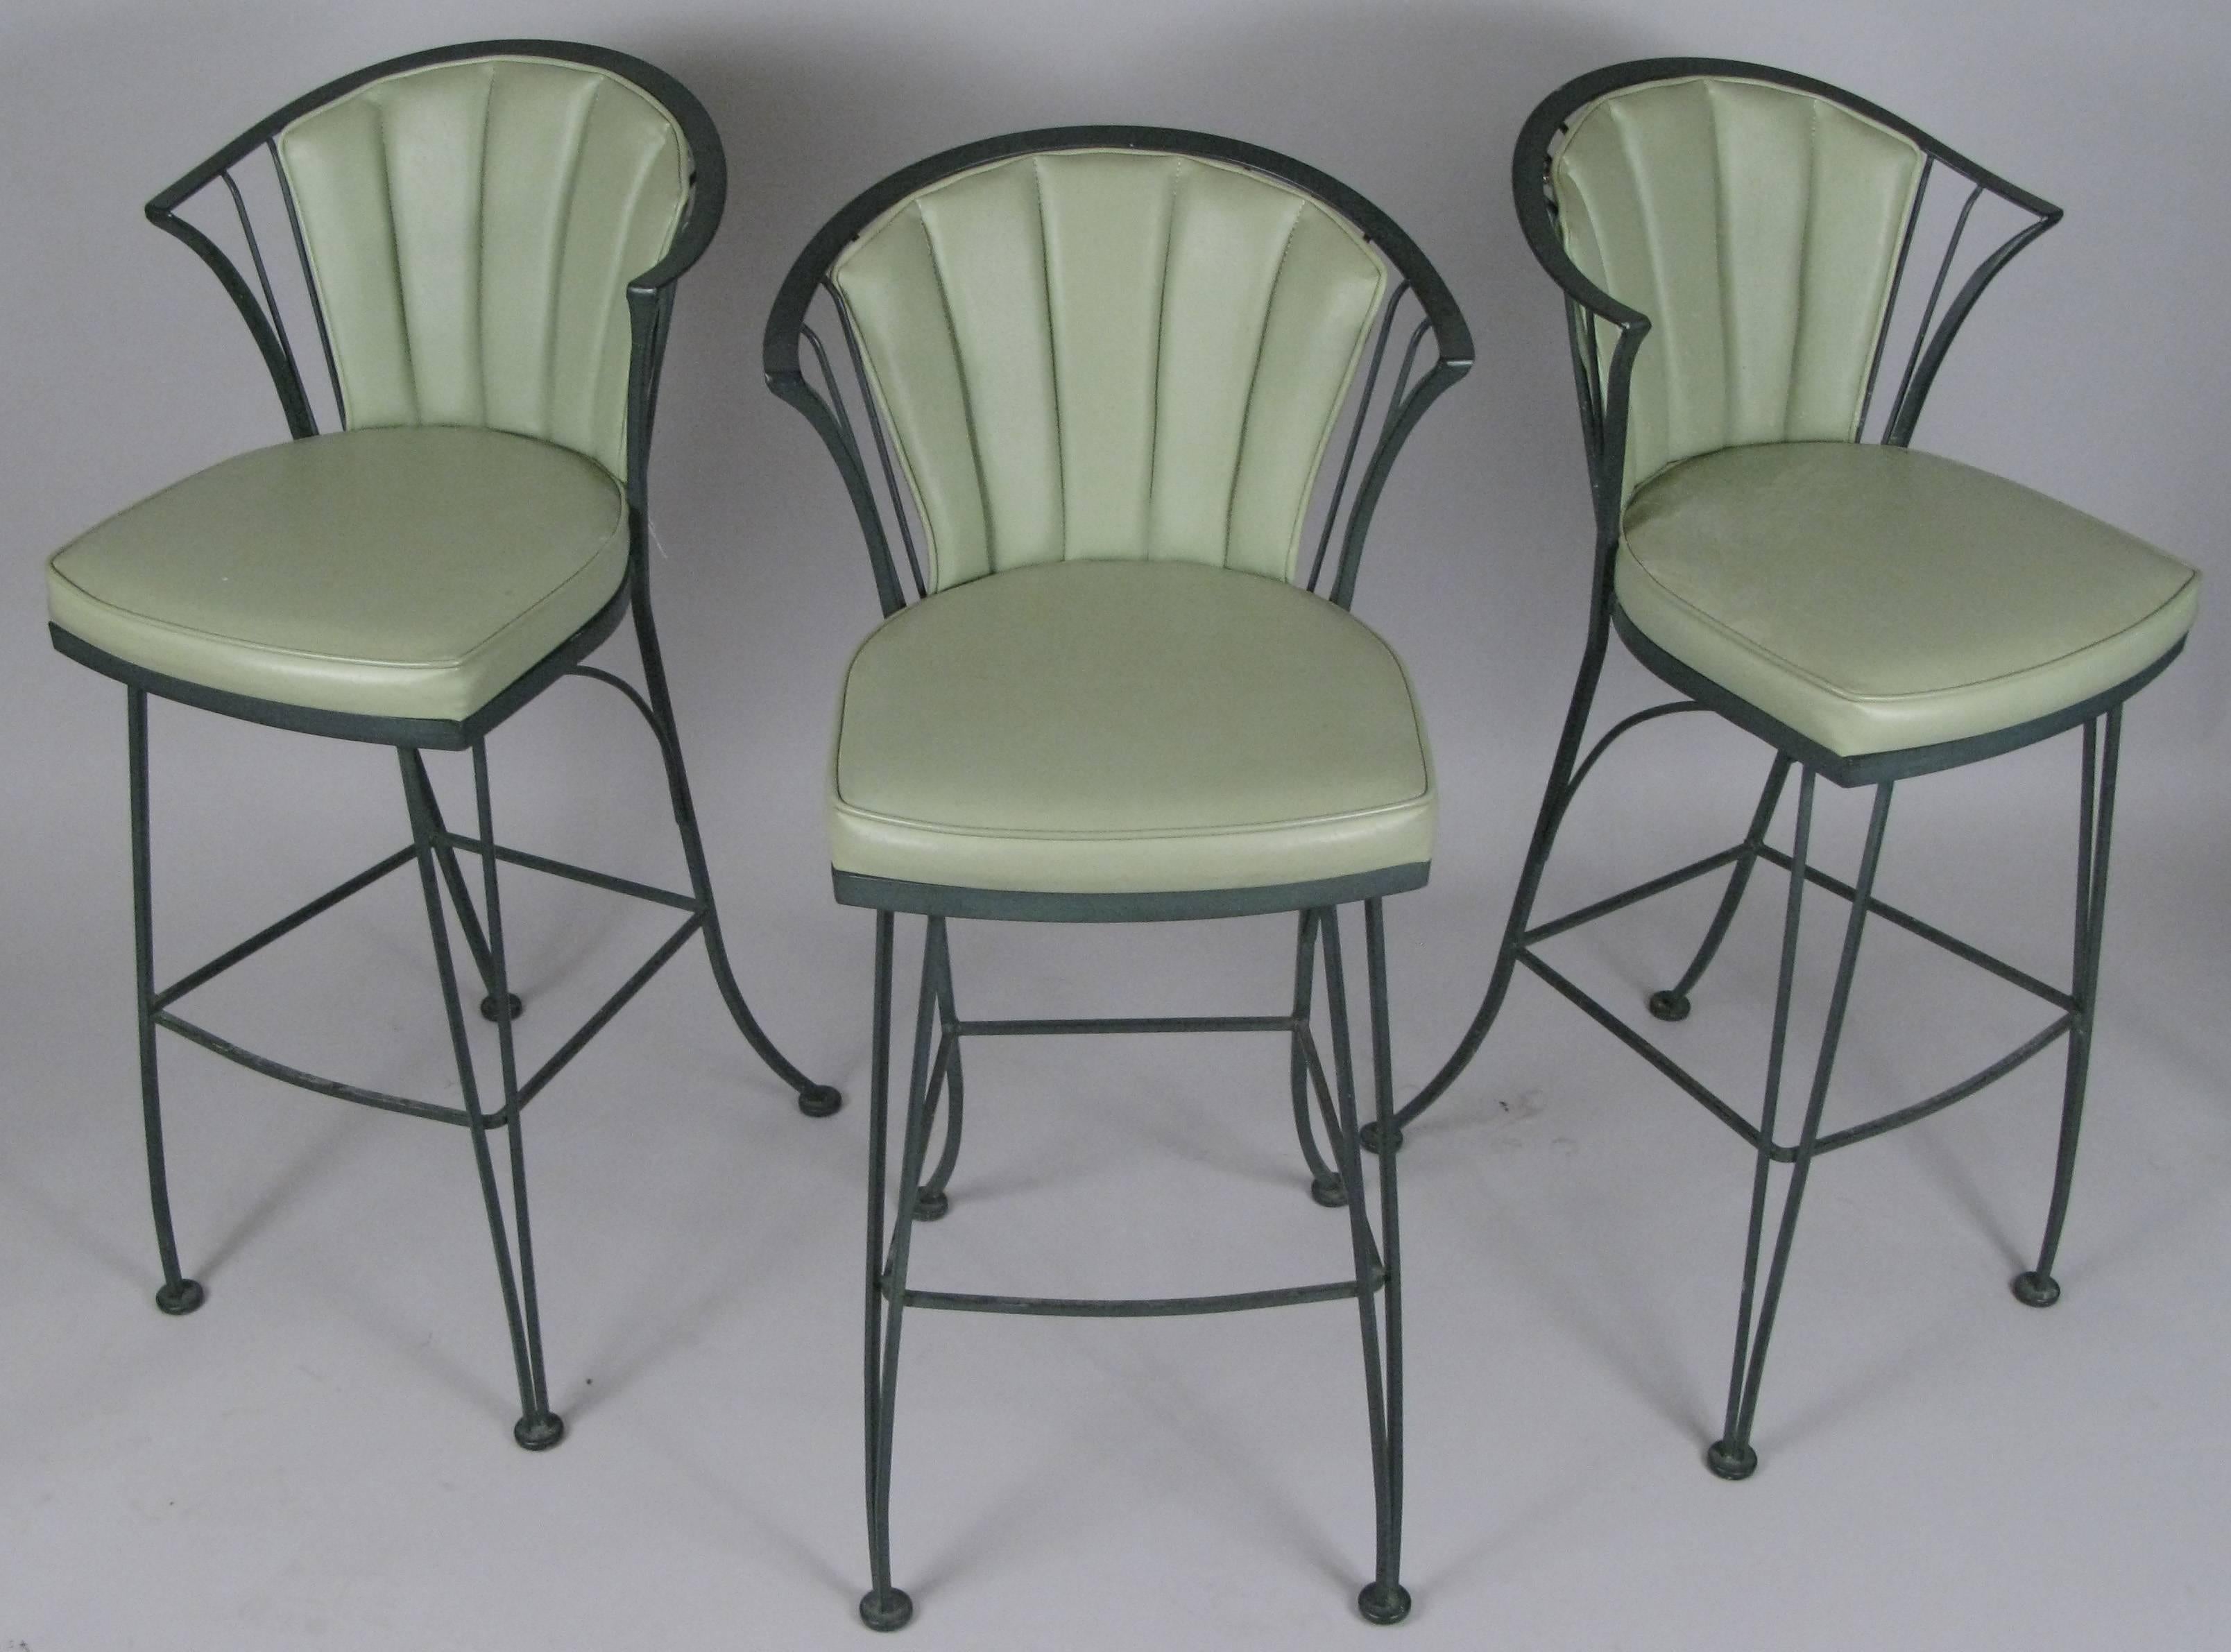 A set of three vintage 1950s wrought iron barstools from the Pinecrest collection by Woodard. Beautiful stylish design with curved legs and back and original seat and back cushions in green vinyl.